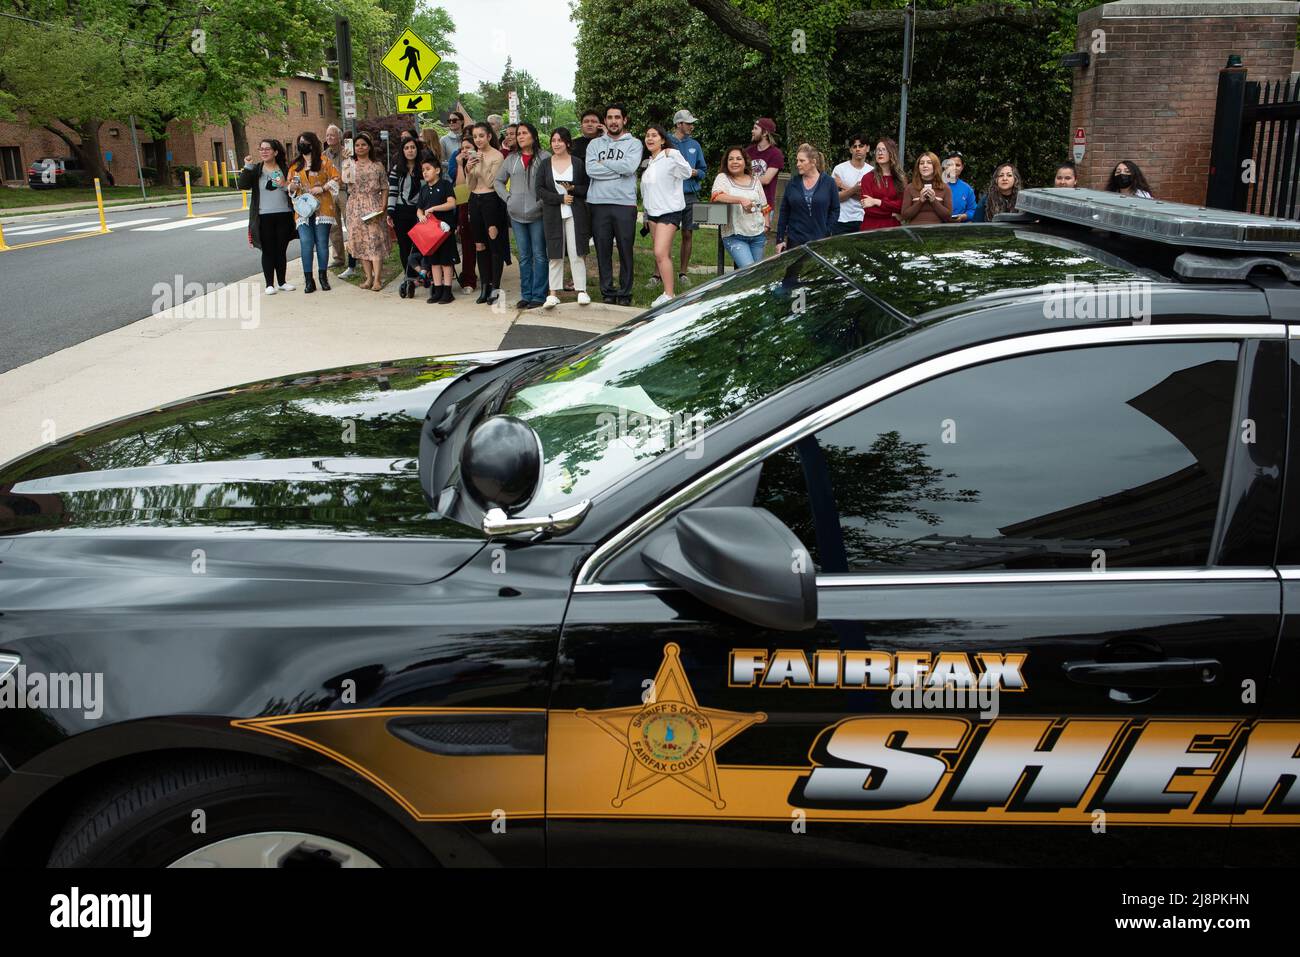 Fairfax County Sheriff's Deputies provide crowd control for the departures of Amber Heard and Johnny Deep from the Fairfax County Courthouse, in Fairfax, at the close of another day in his civil trial with Amber Heard, Thursday, May 5, 2022. Depp brought a defamation lawsuit against his former wife, actress Amber Heard, after she wrote an op-ed in The Washington Post in 2018 that, without naming Depp, accused him of domestic abuse.Credit: Cliff Owen/CNP/Sipa USA (RESTRICTION: NO New York or New Jersey Newspapers or newspapers within a 75 mile radius of New York City) Stock Photo